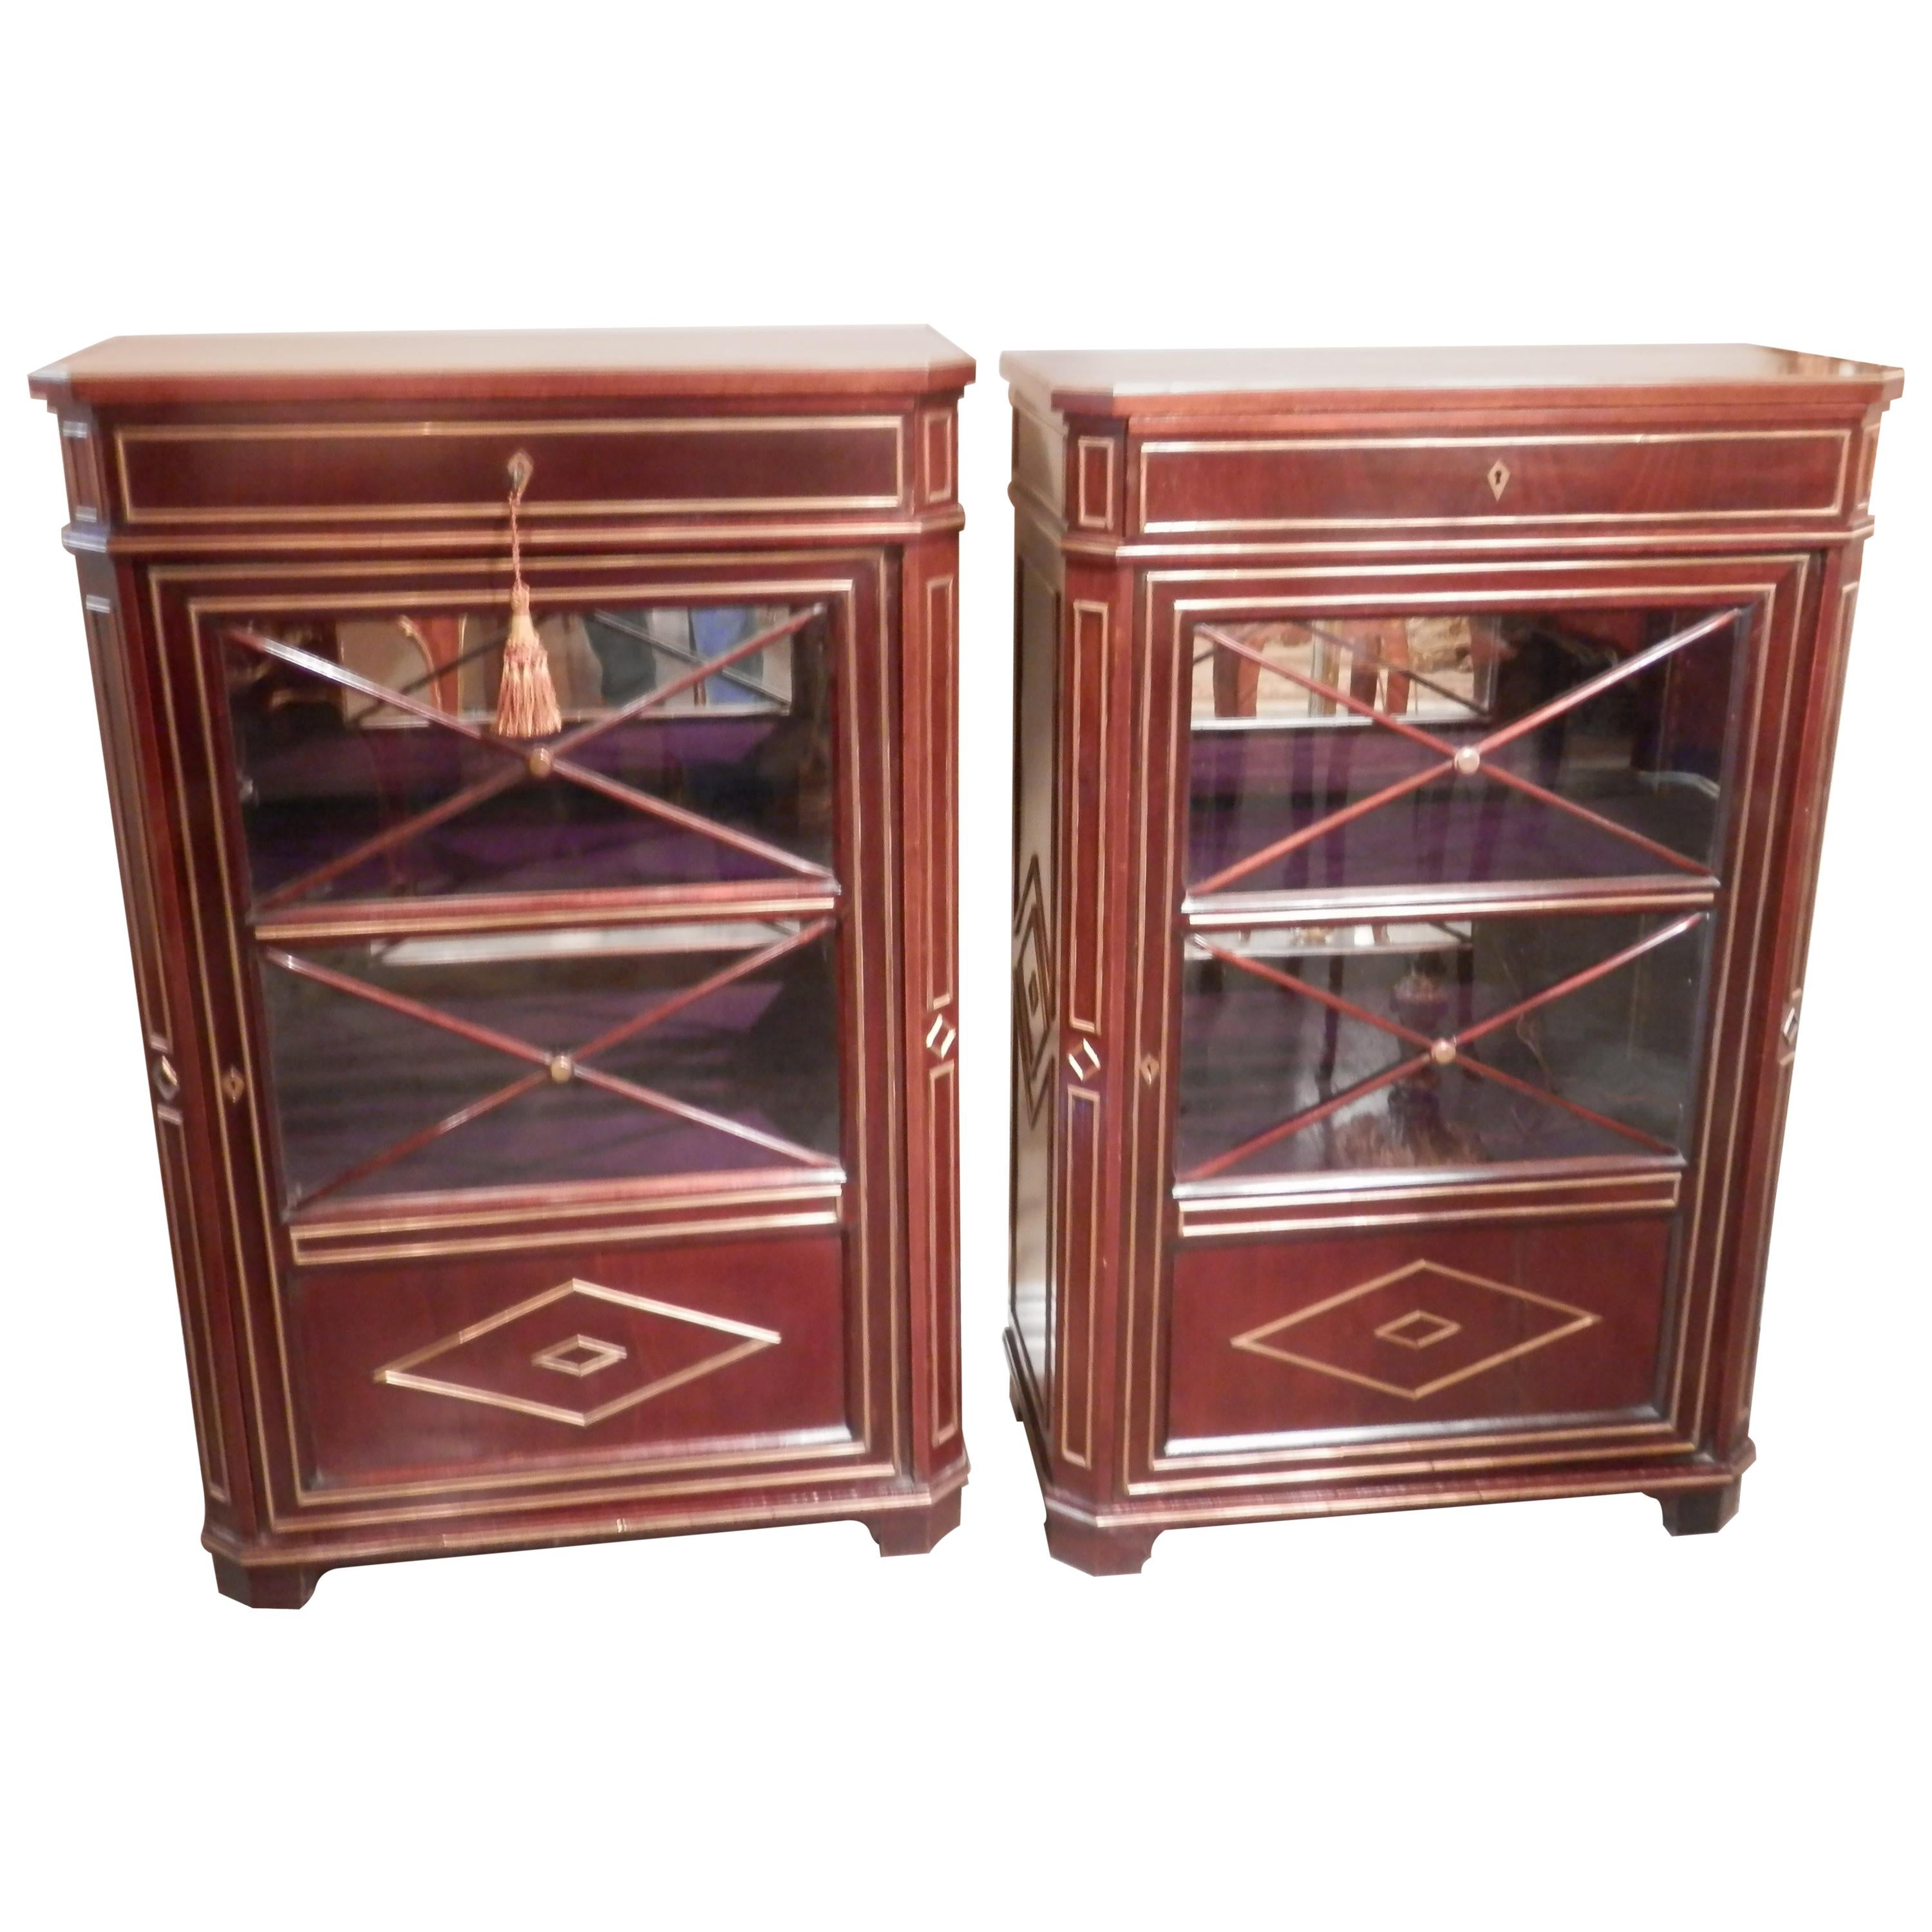 Pair of 19th Century Russian Mahogany and Brass Inlayed Cabinets